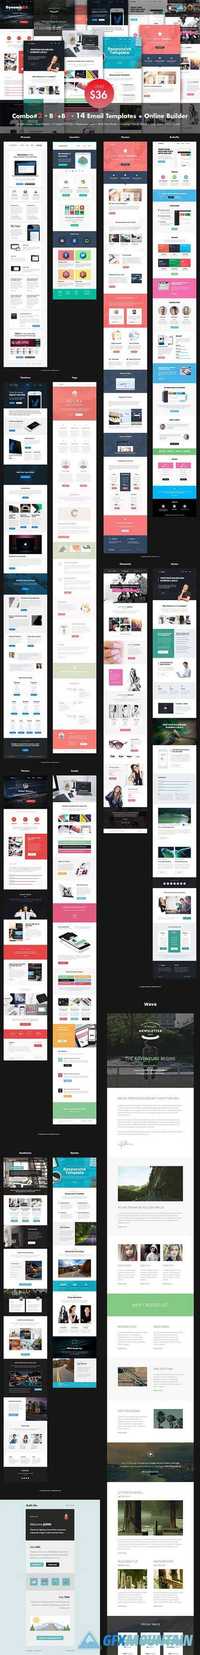 Combo#2 - B1+B3 - 14 Email Templates 663099